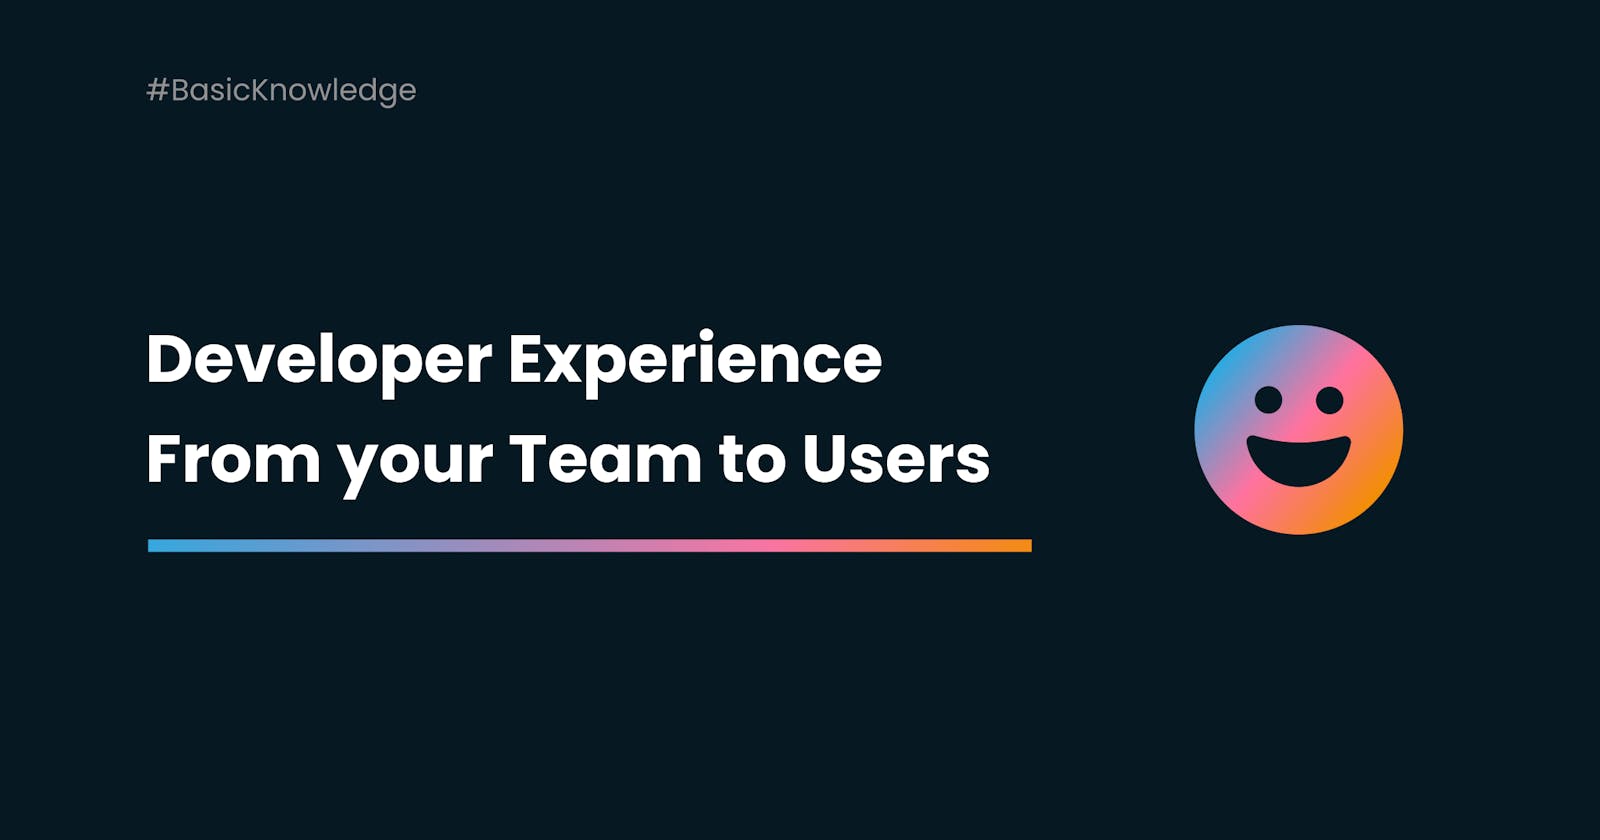 The Developer Experience, from your Own Team to your End-Users